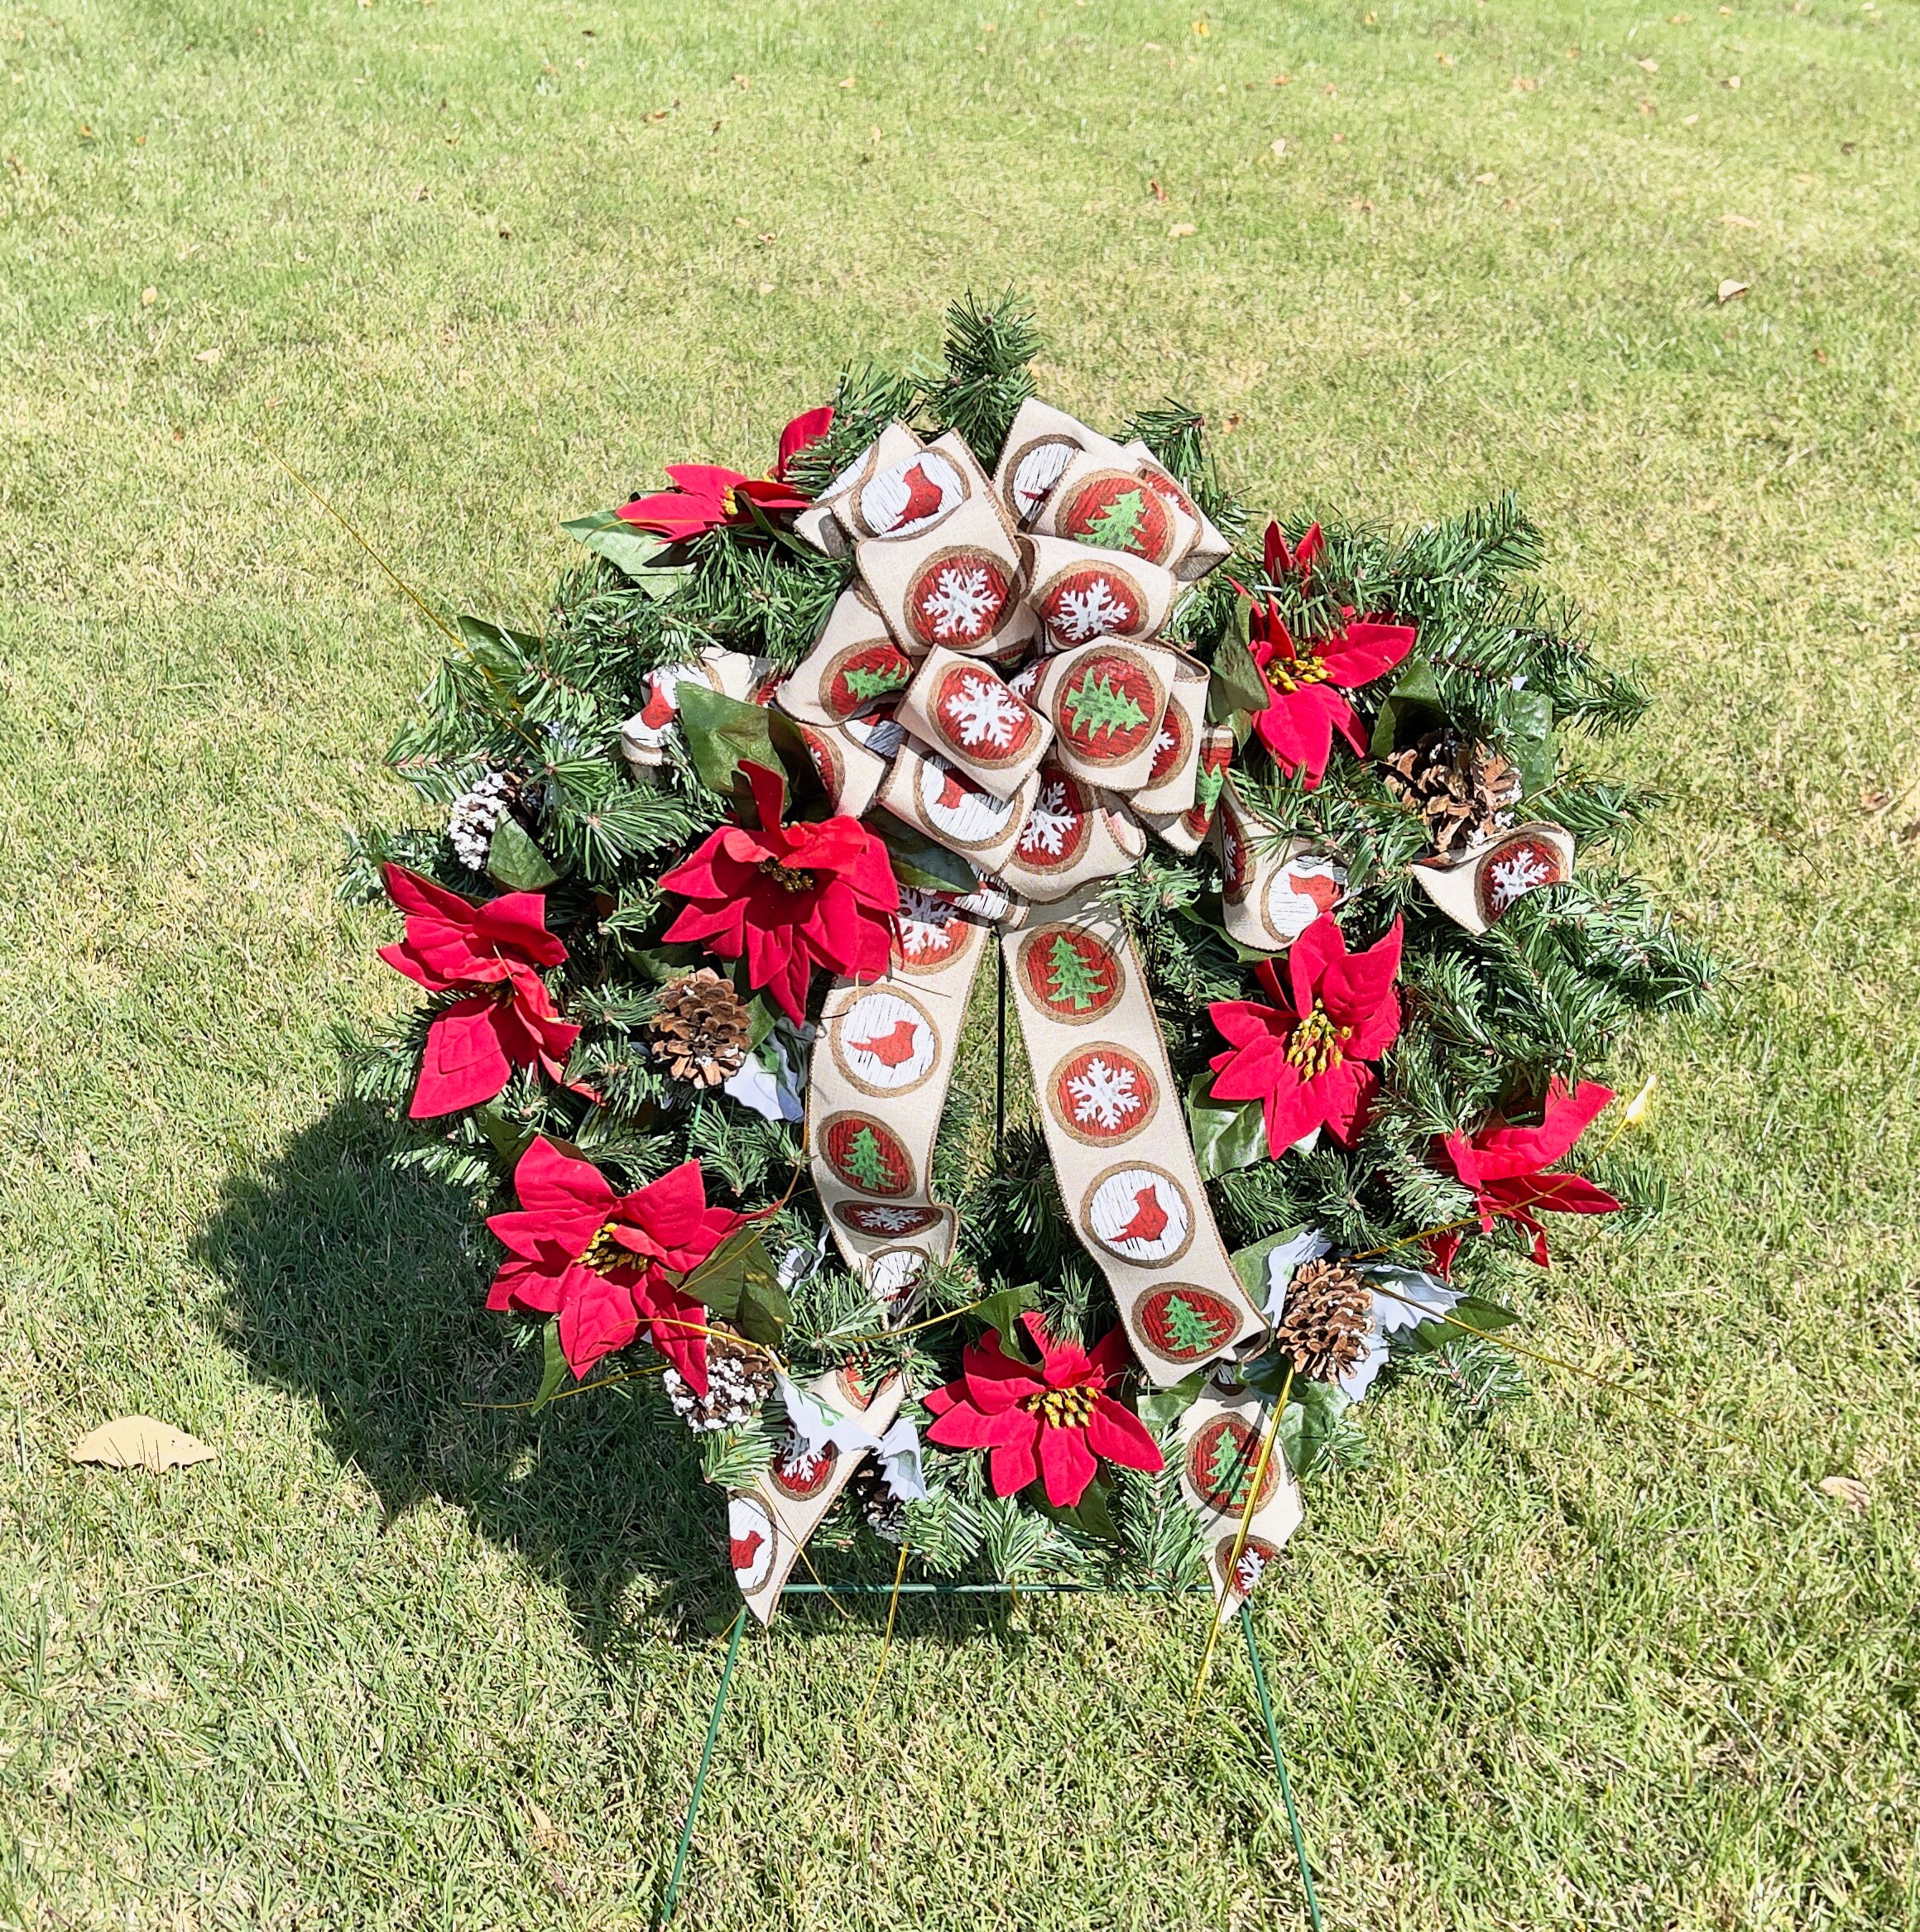 Cemetery Artificial Wreath Holly & Cones on Stand